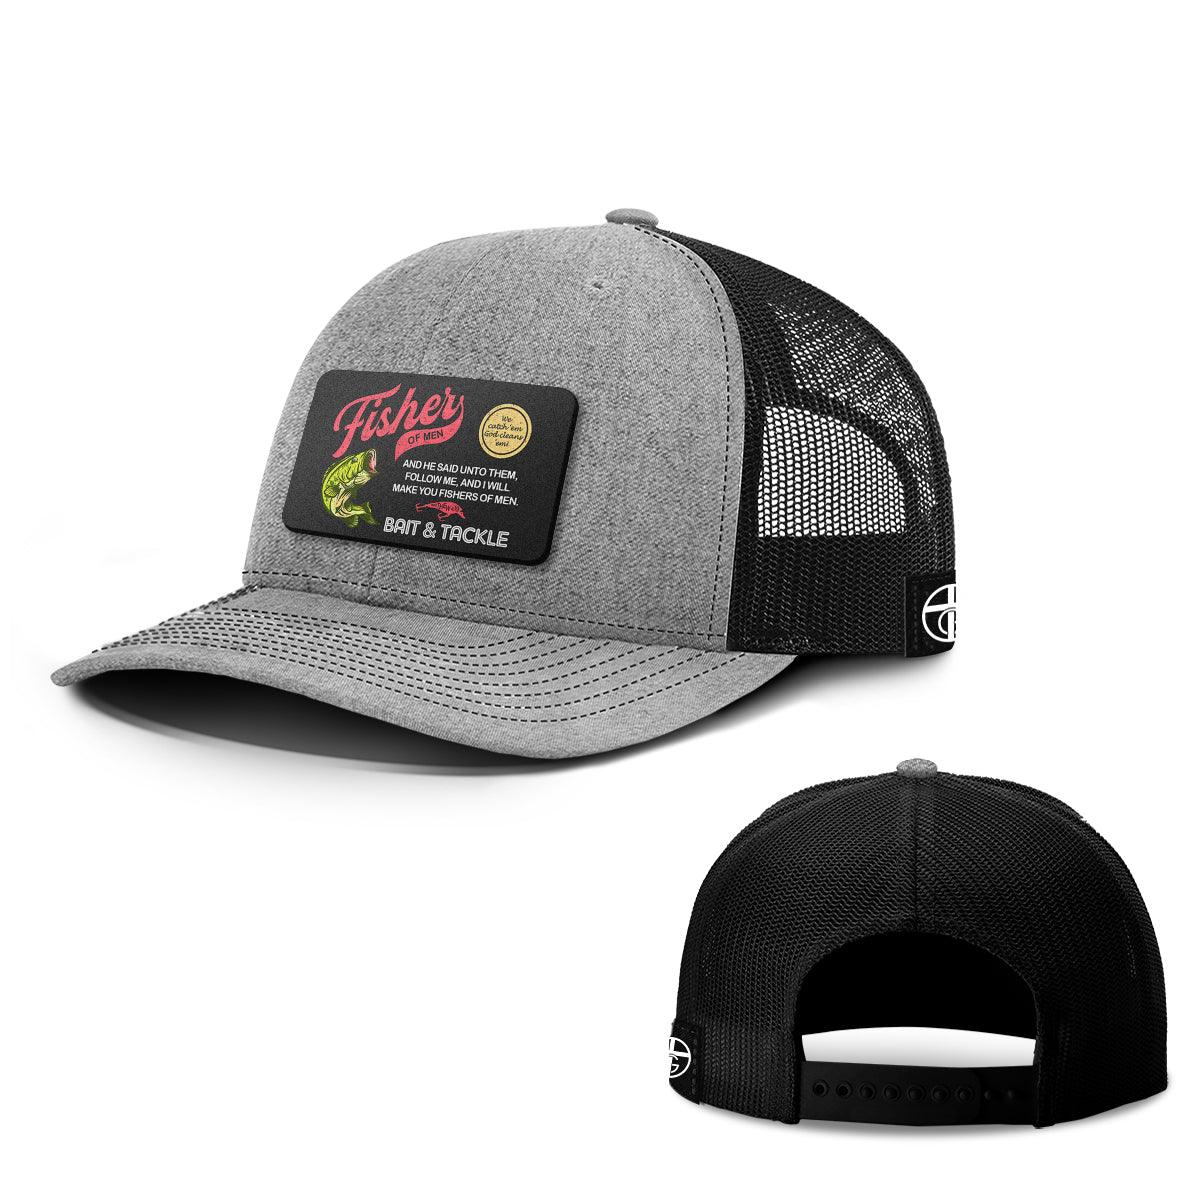 Fisher of Men Patch Hats Snapback / Heather and Black / One Size